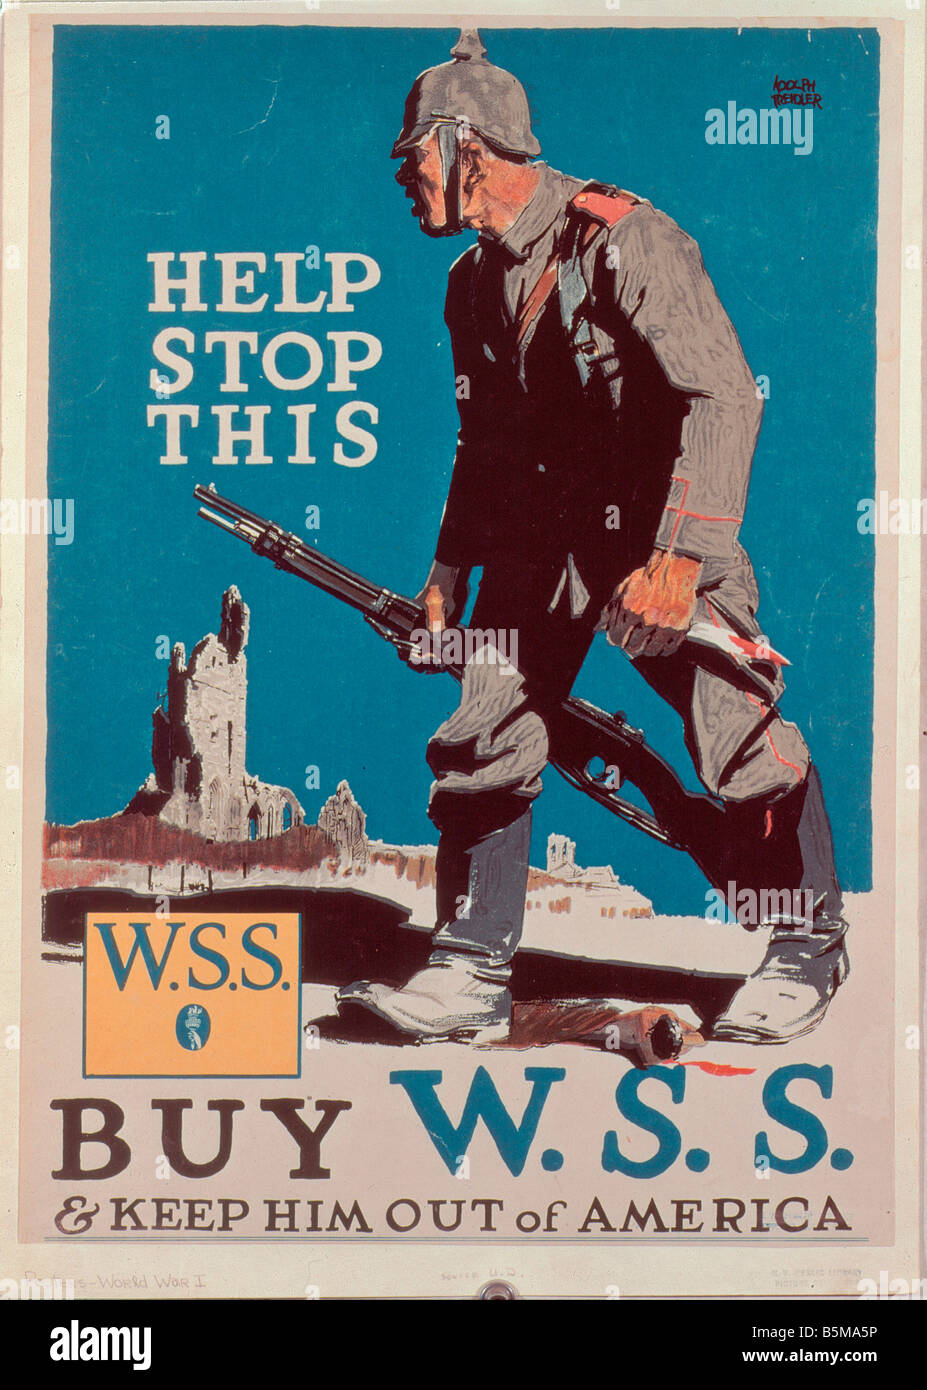 2 G55 P1 1917 9 E Help stop this US Poster 1917 18 History World War I Propaganda Help stop this Buy W S S keep him out of Ameri Stock Photo